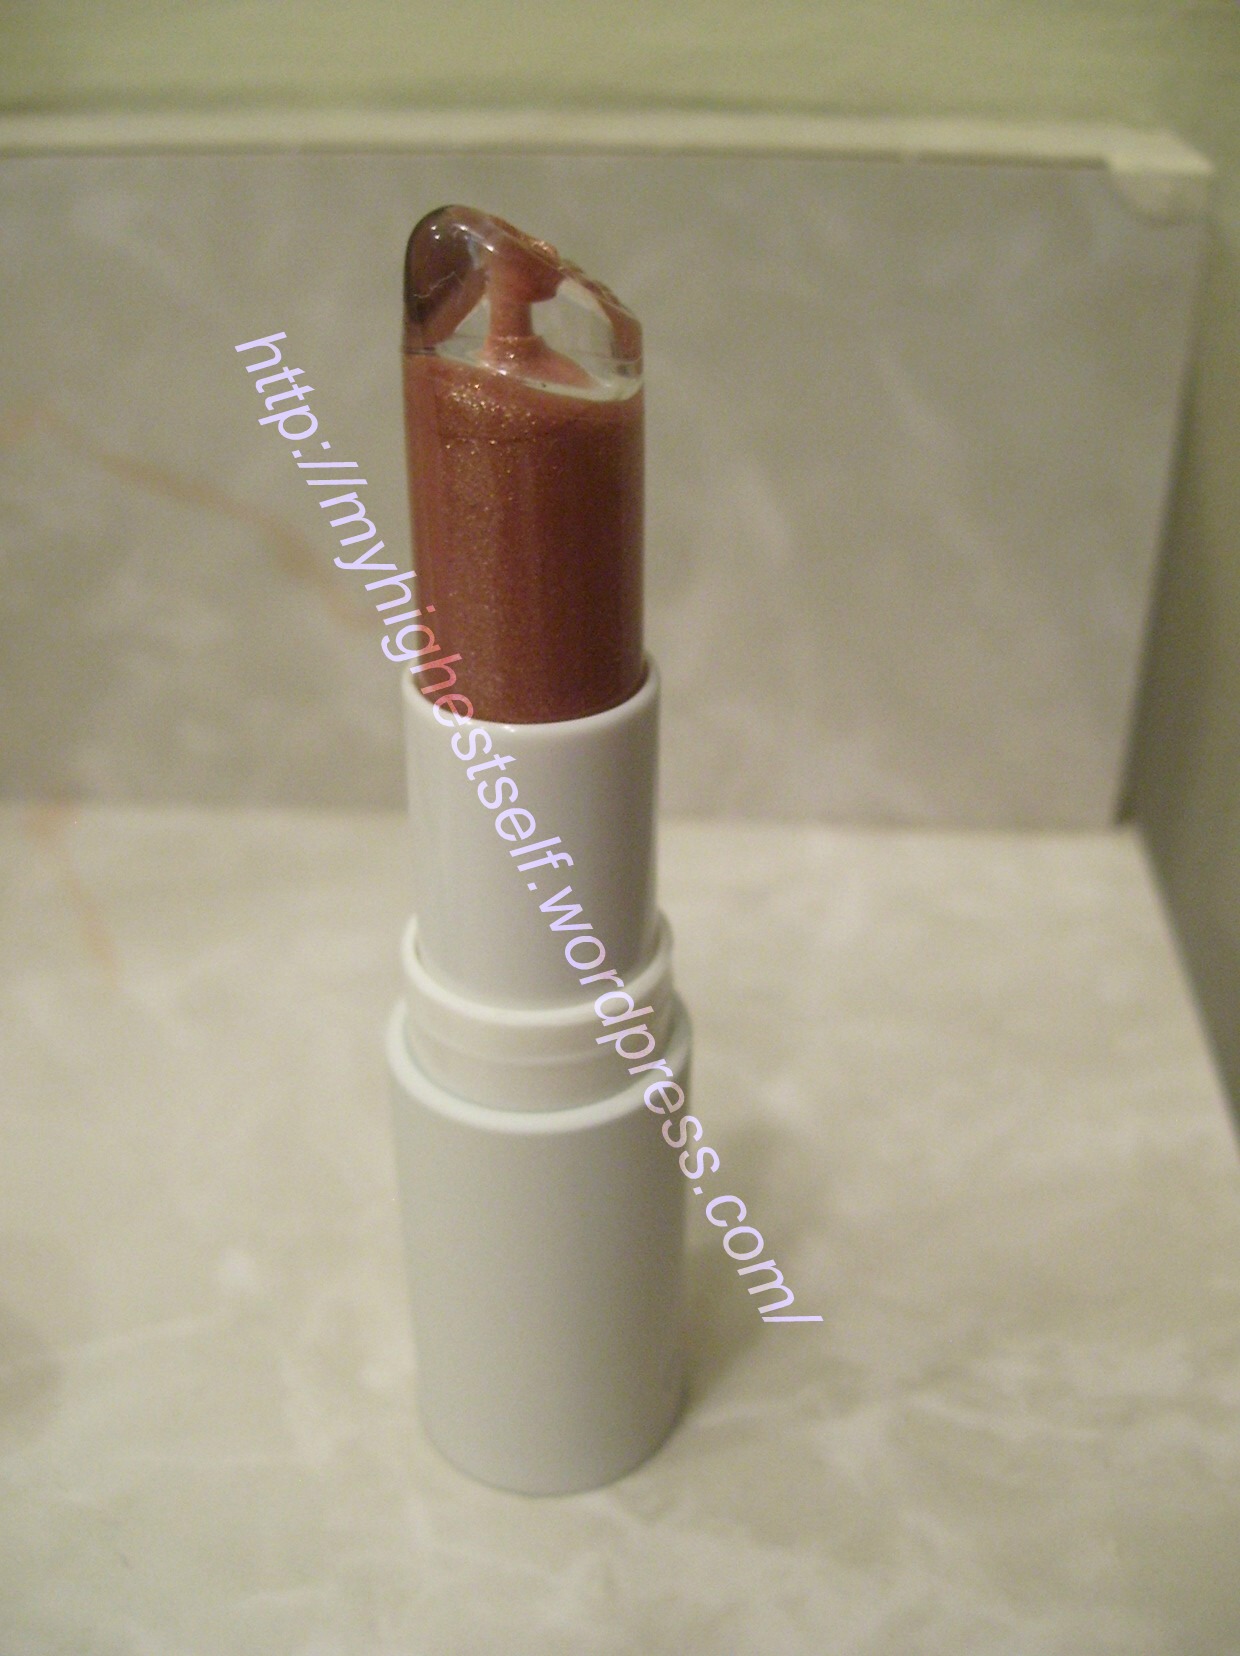 Swatch & Review of Exude Lipstick!